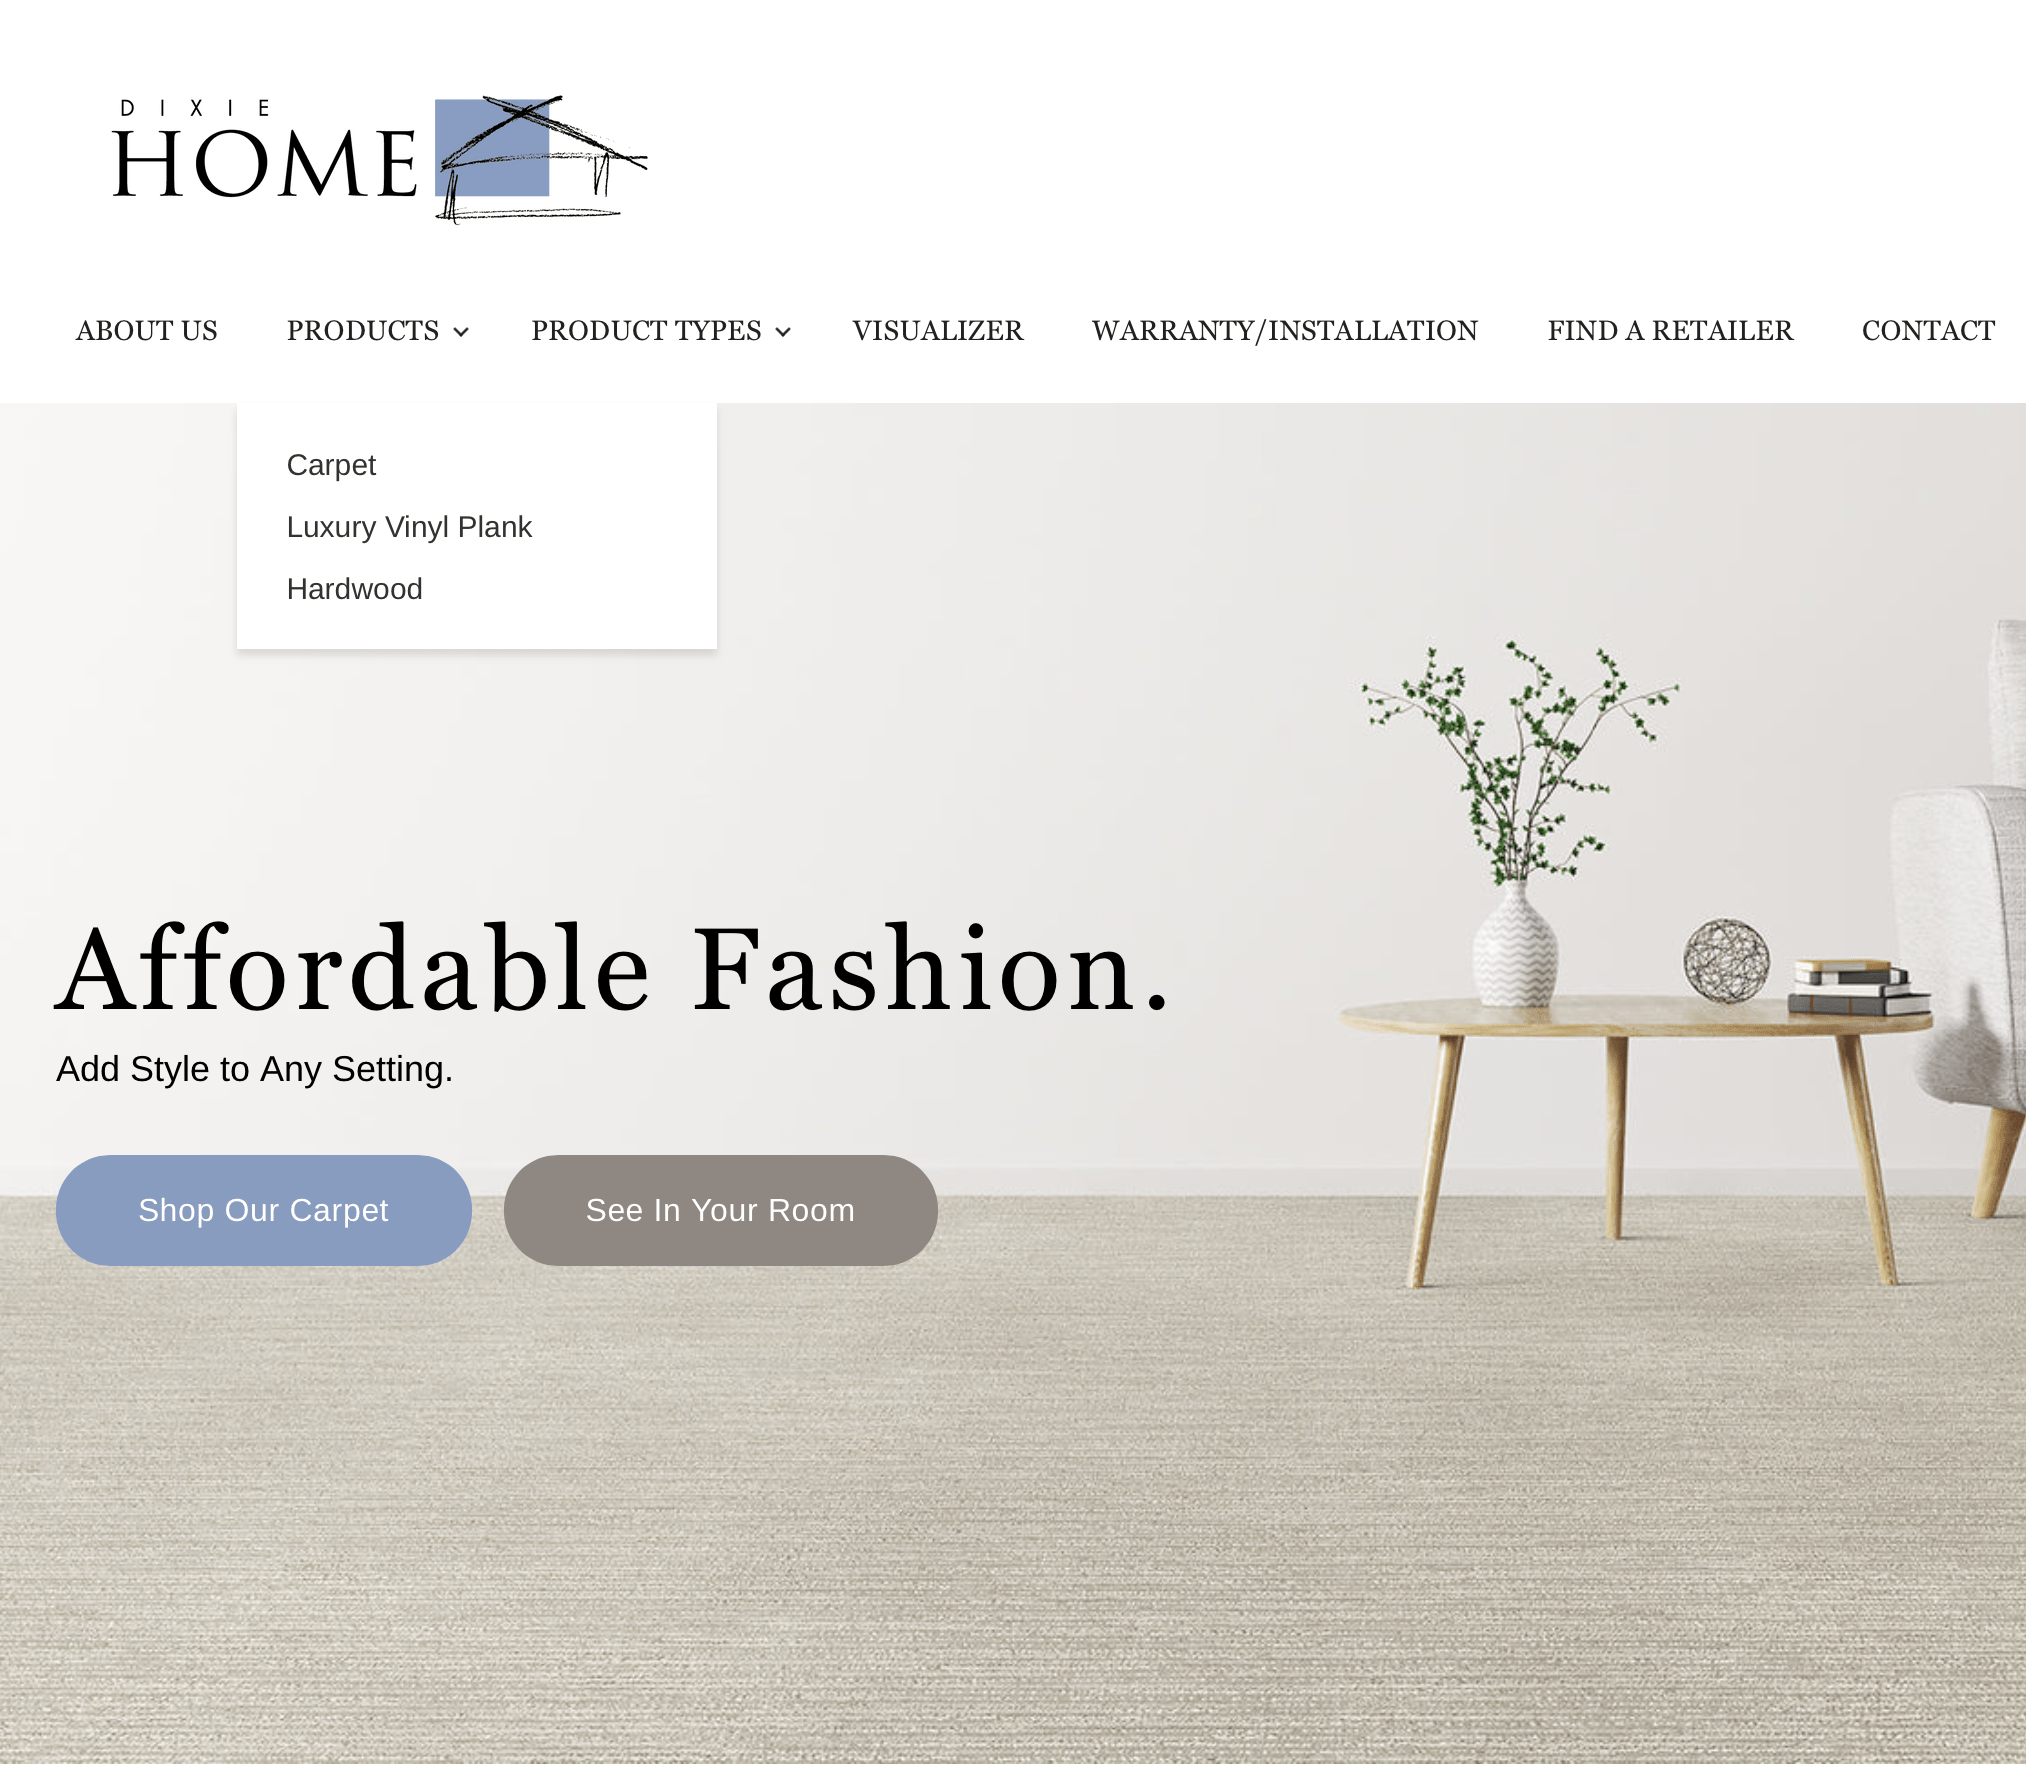 Dixie Home Launches New Website Floor Ering News